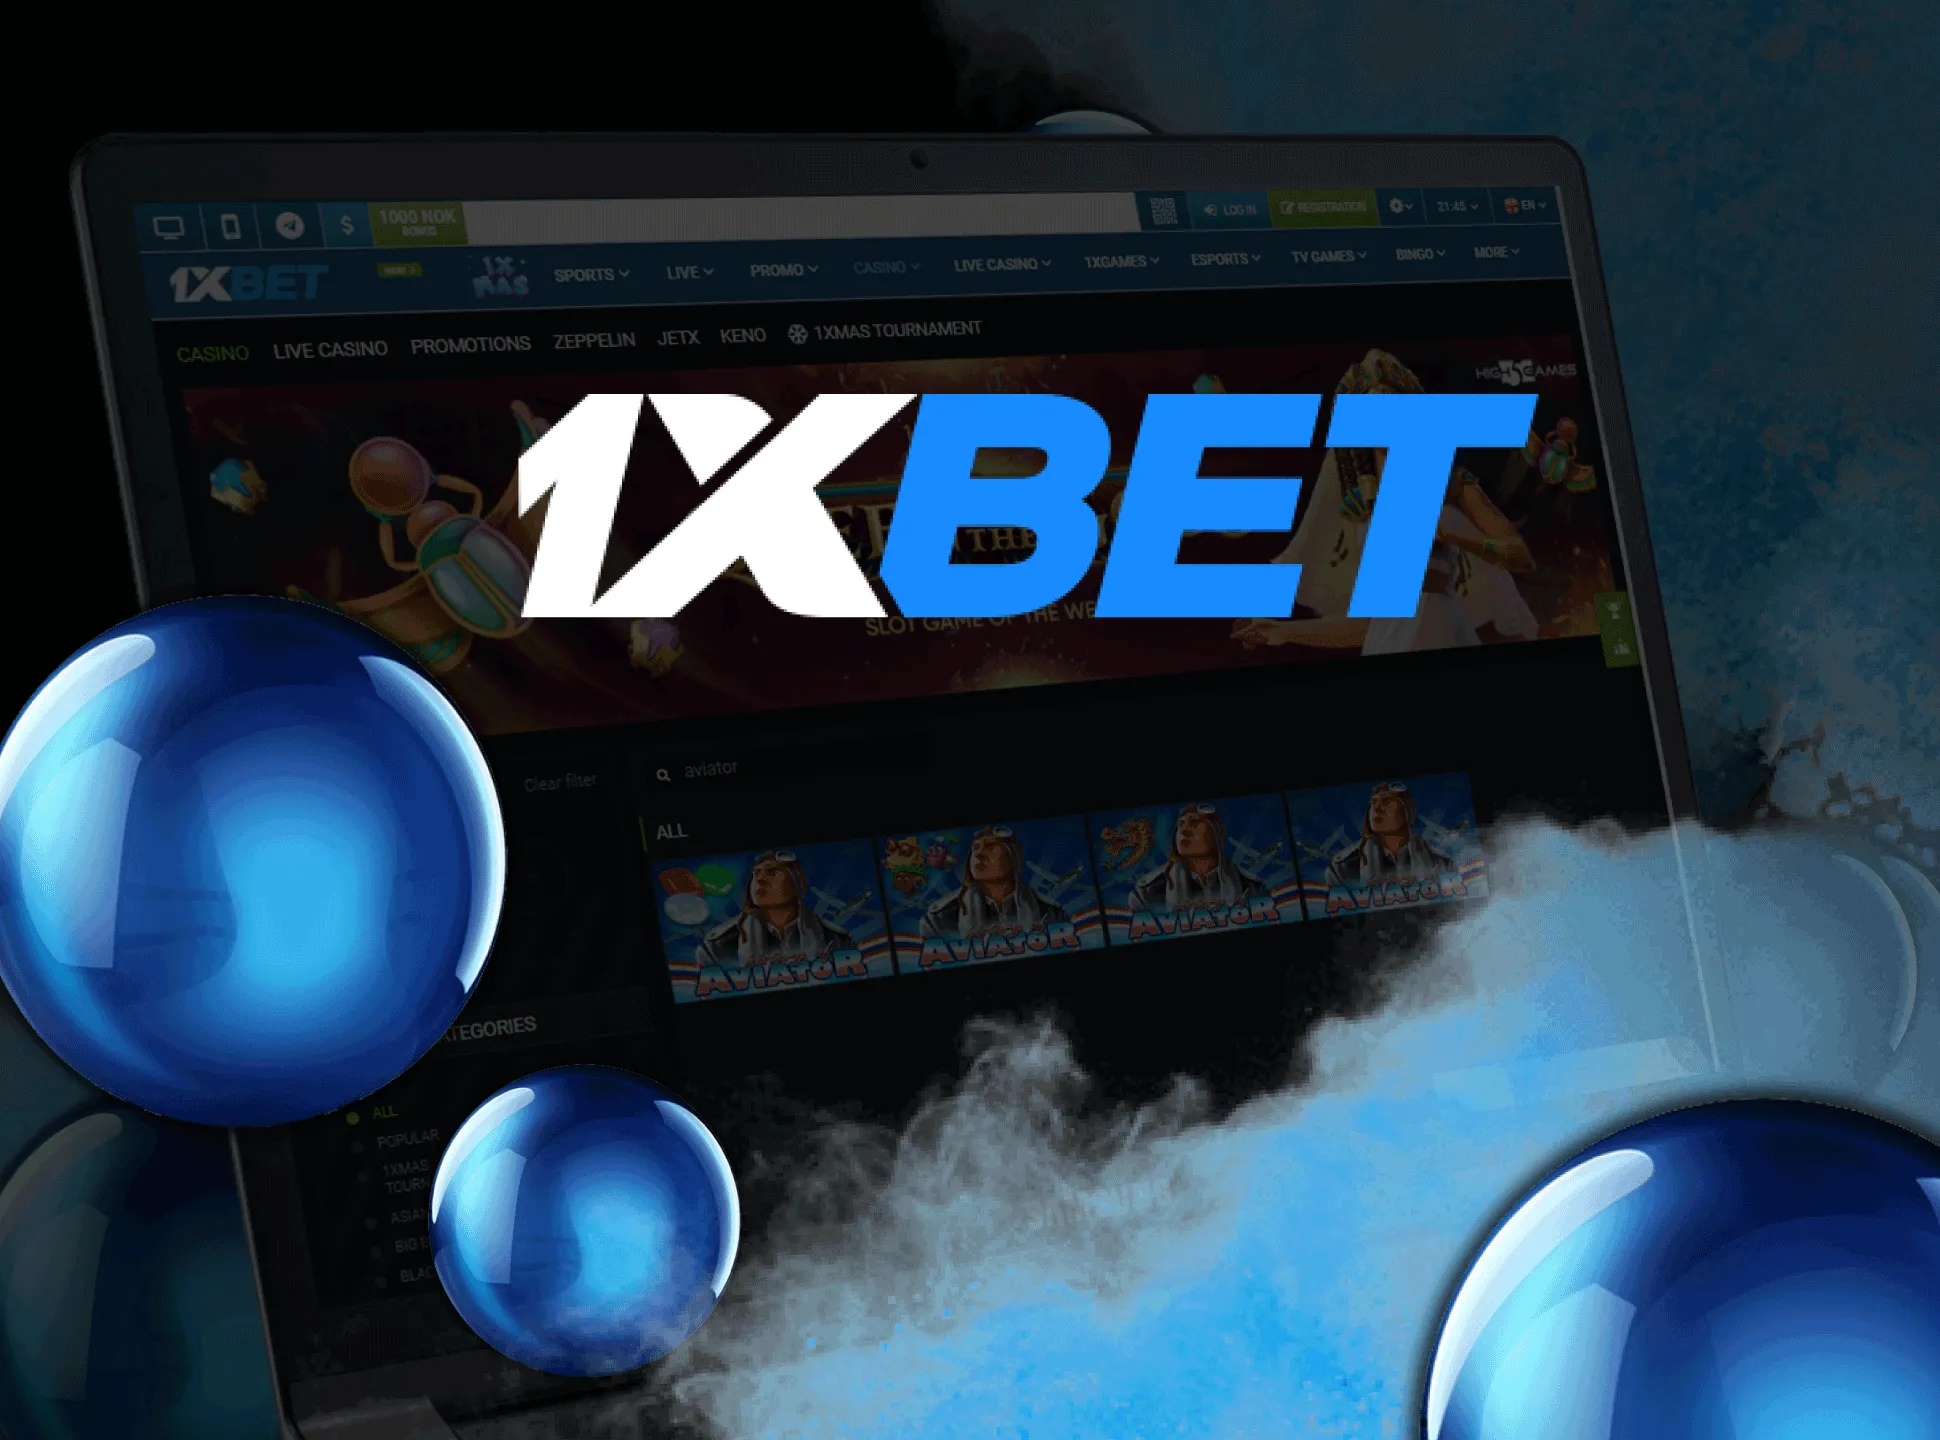 Sign up for 1xbet and play Aviator game.